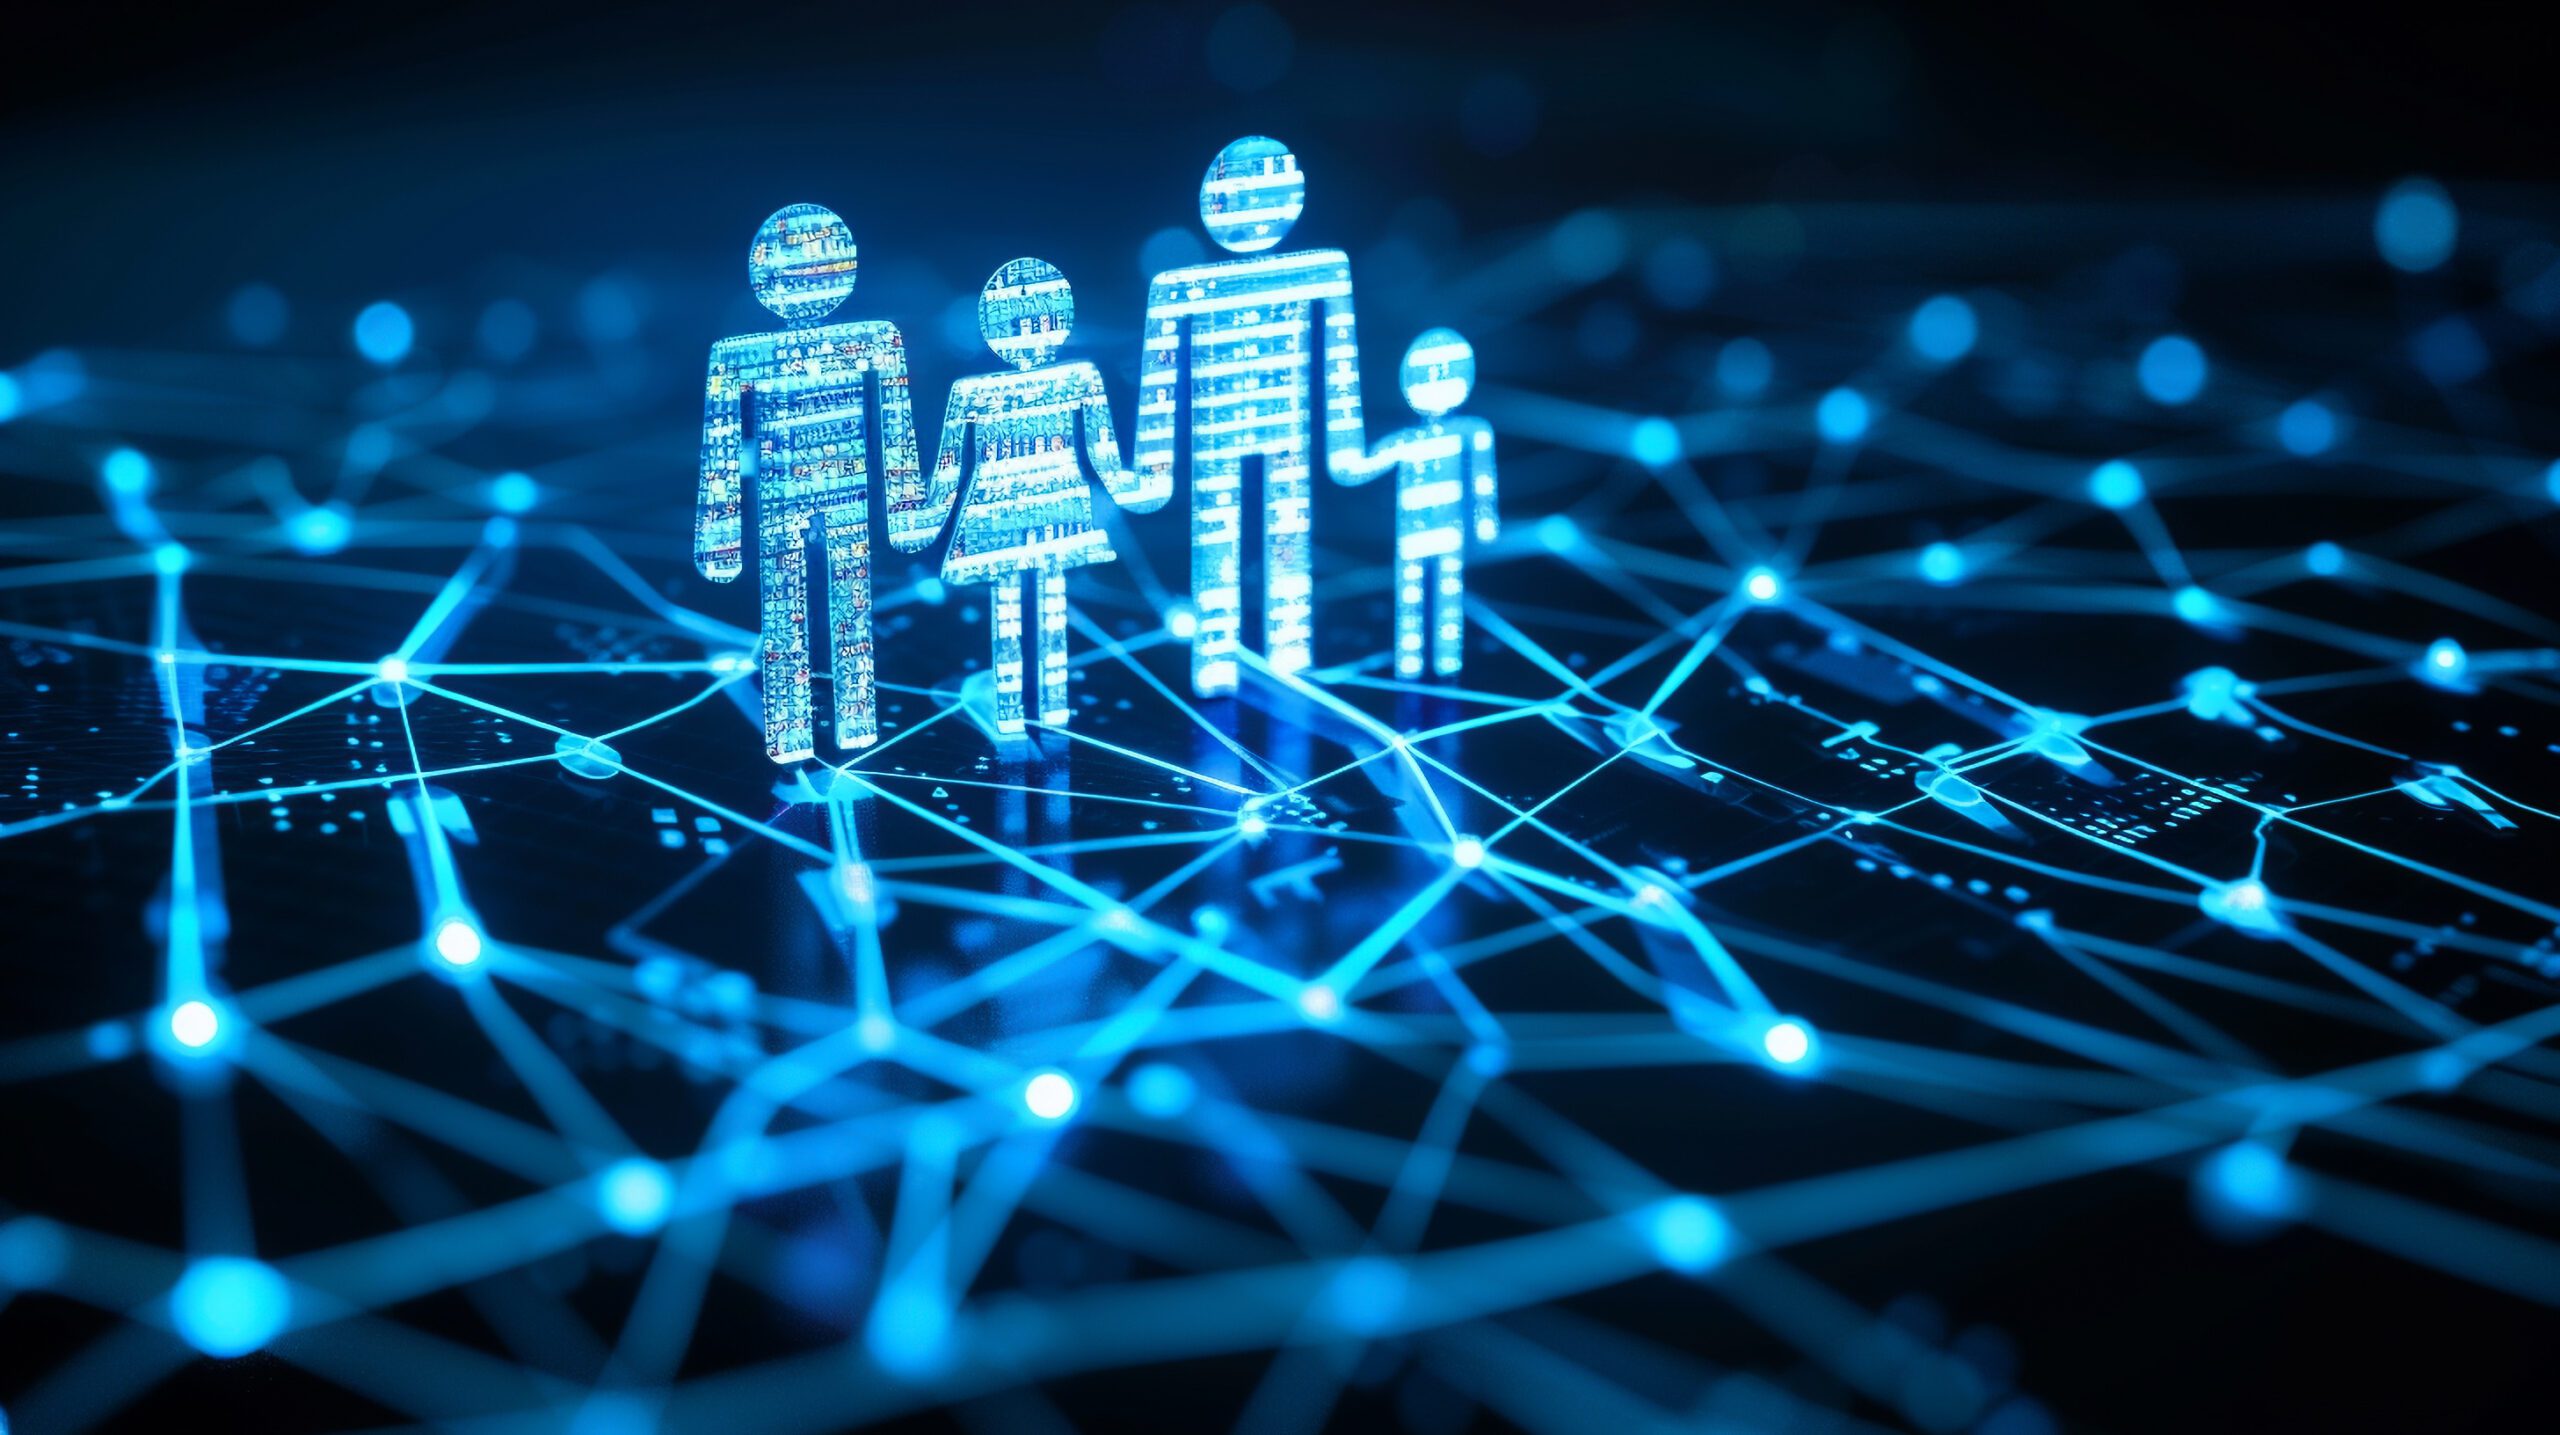 A futuristic digital illustration features a glowing blue hologram of a family with two adults and two children, standing on an interconnected network of lines and nodes. The scene symbolizes technology's impact on human connections and family dynamics.